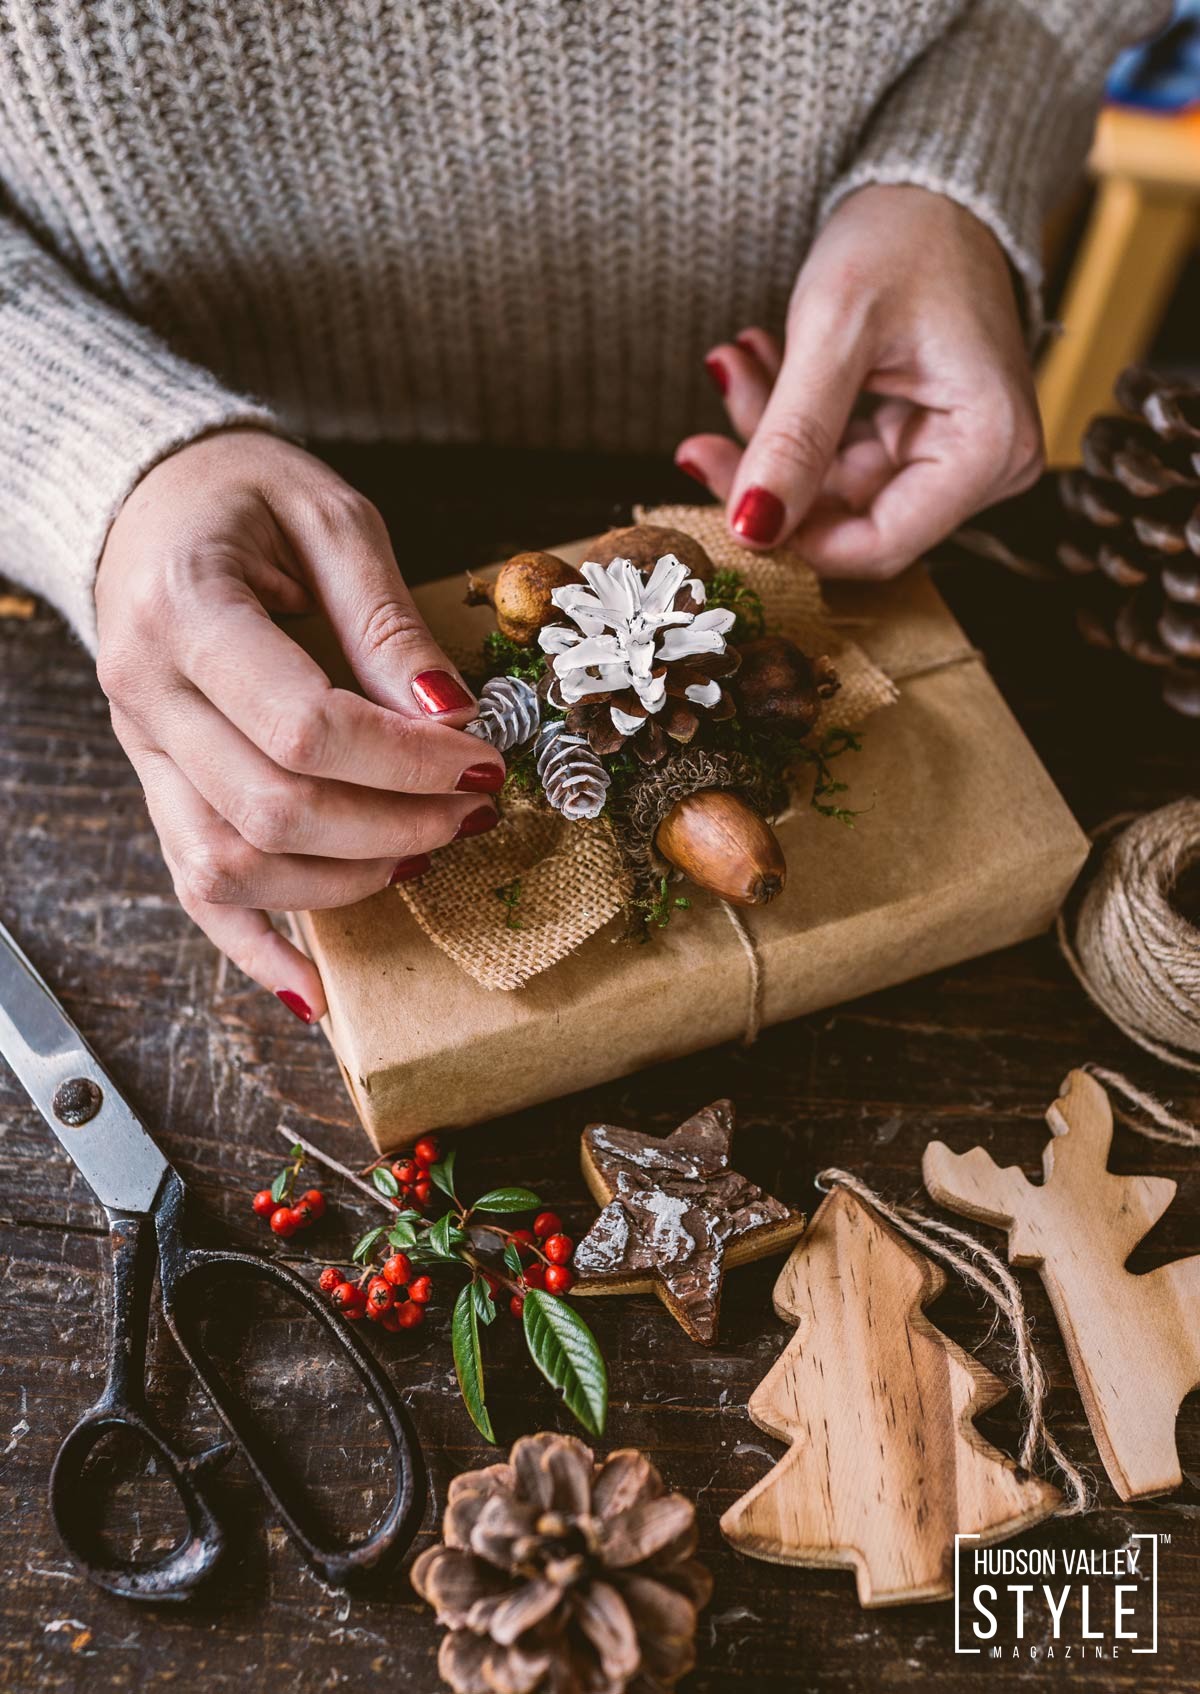 Eco-friendly Gifts for a merrier (and greener) Holiday Season